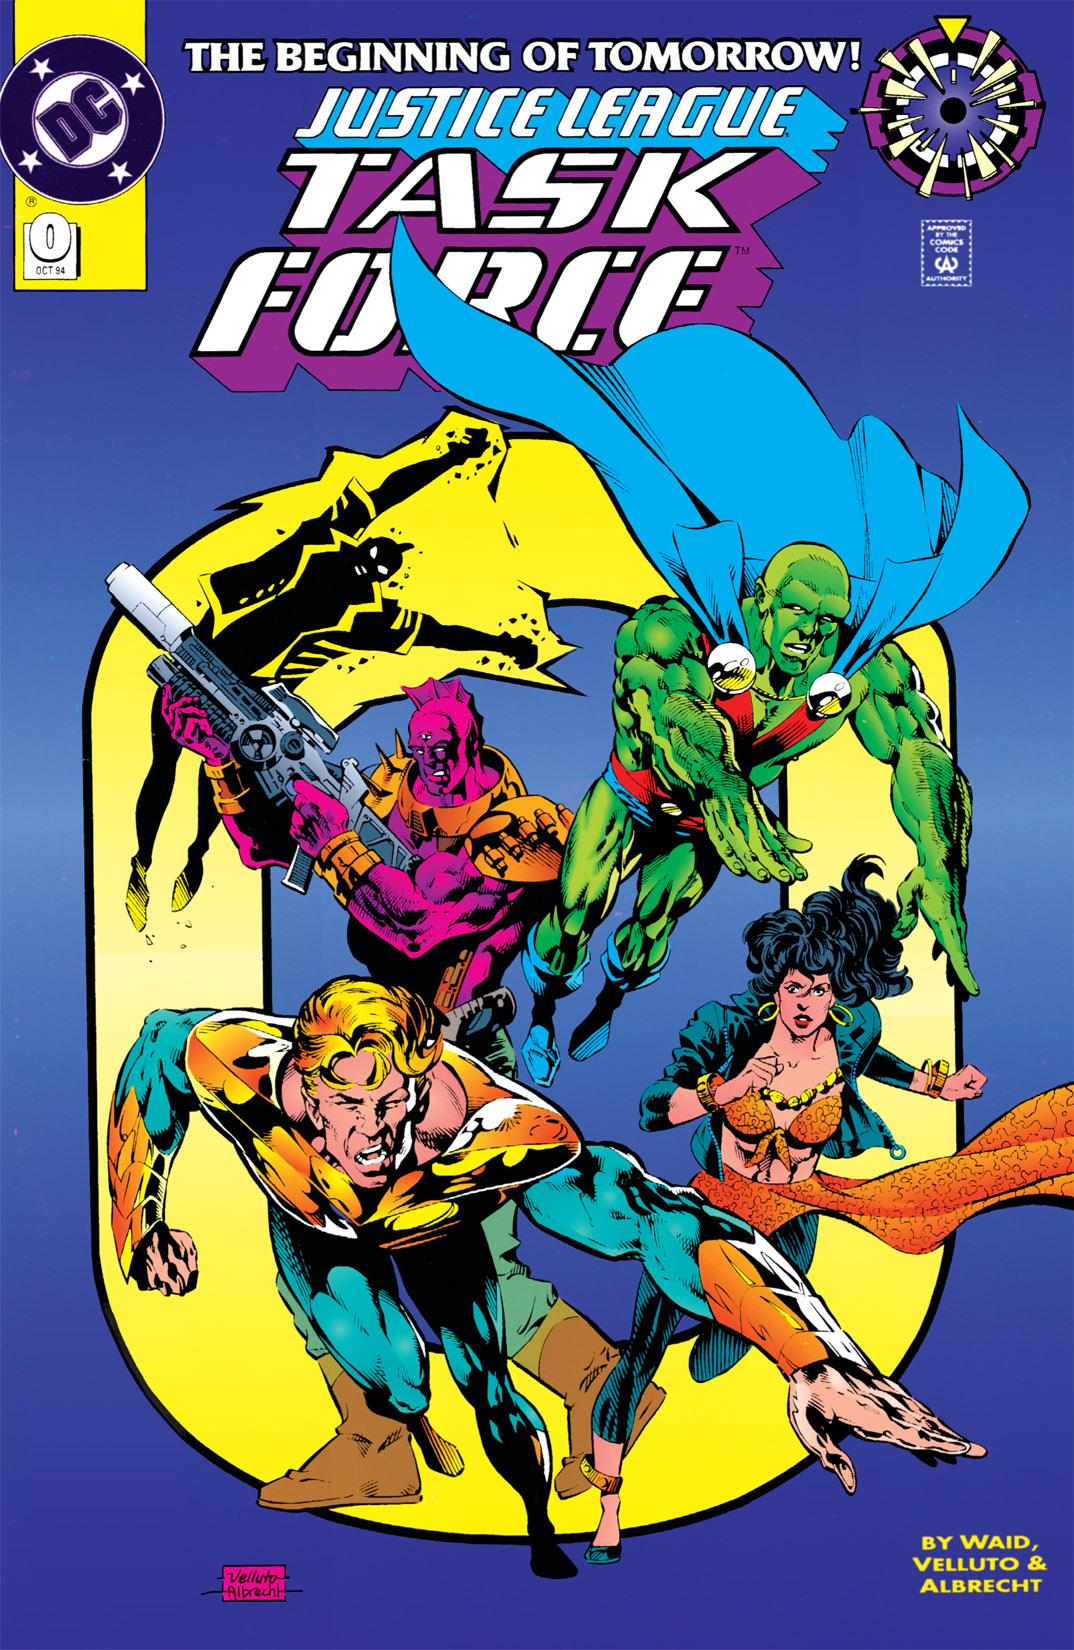 Read online Justice League Task Force comic -  Issue #0 - 1